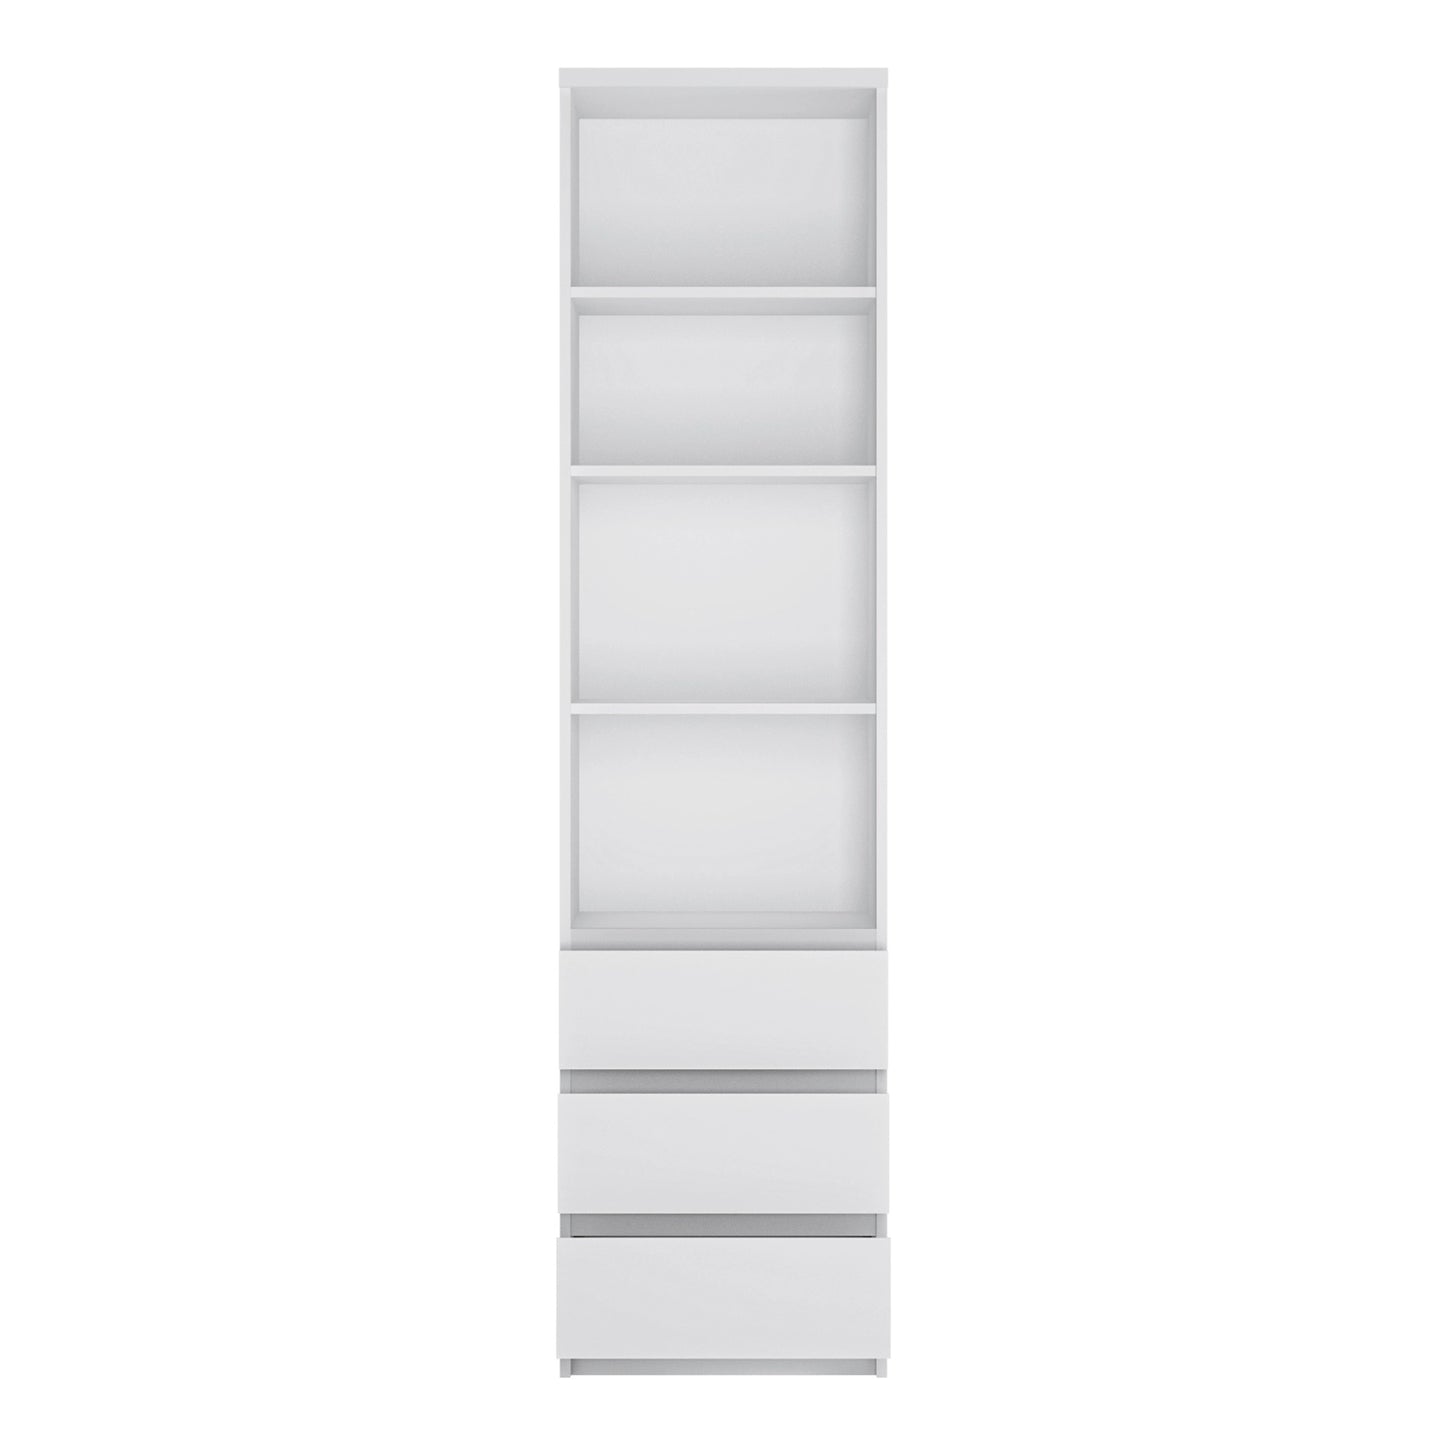 Furniture To Go Fribo Tall Narrow 3 Drawer Bookcase in White